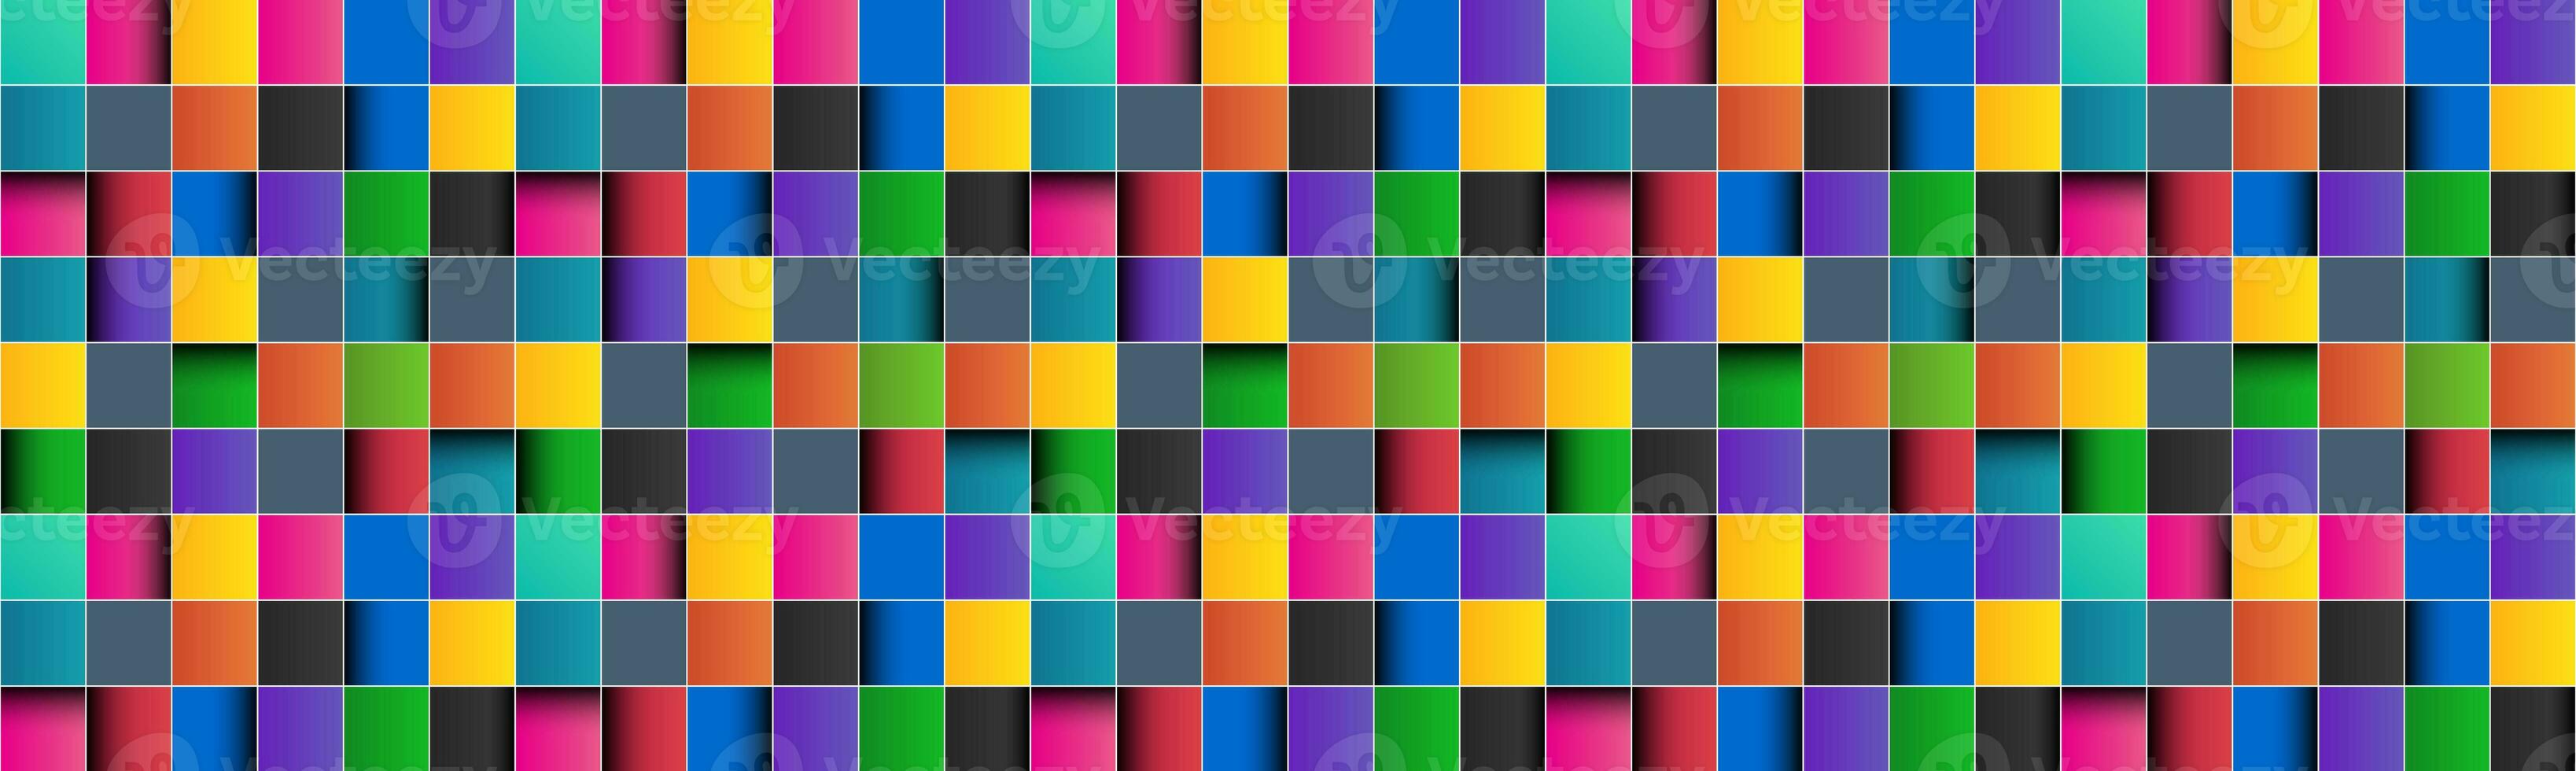 Colorful square abstract header with white lines. Colored square with shadows banner. Pixel mosaic background. Vector illustration photo